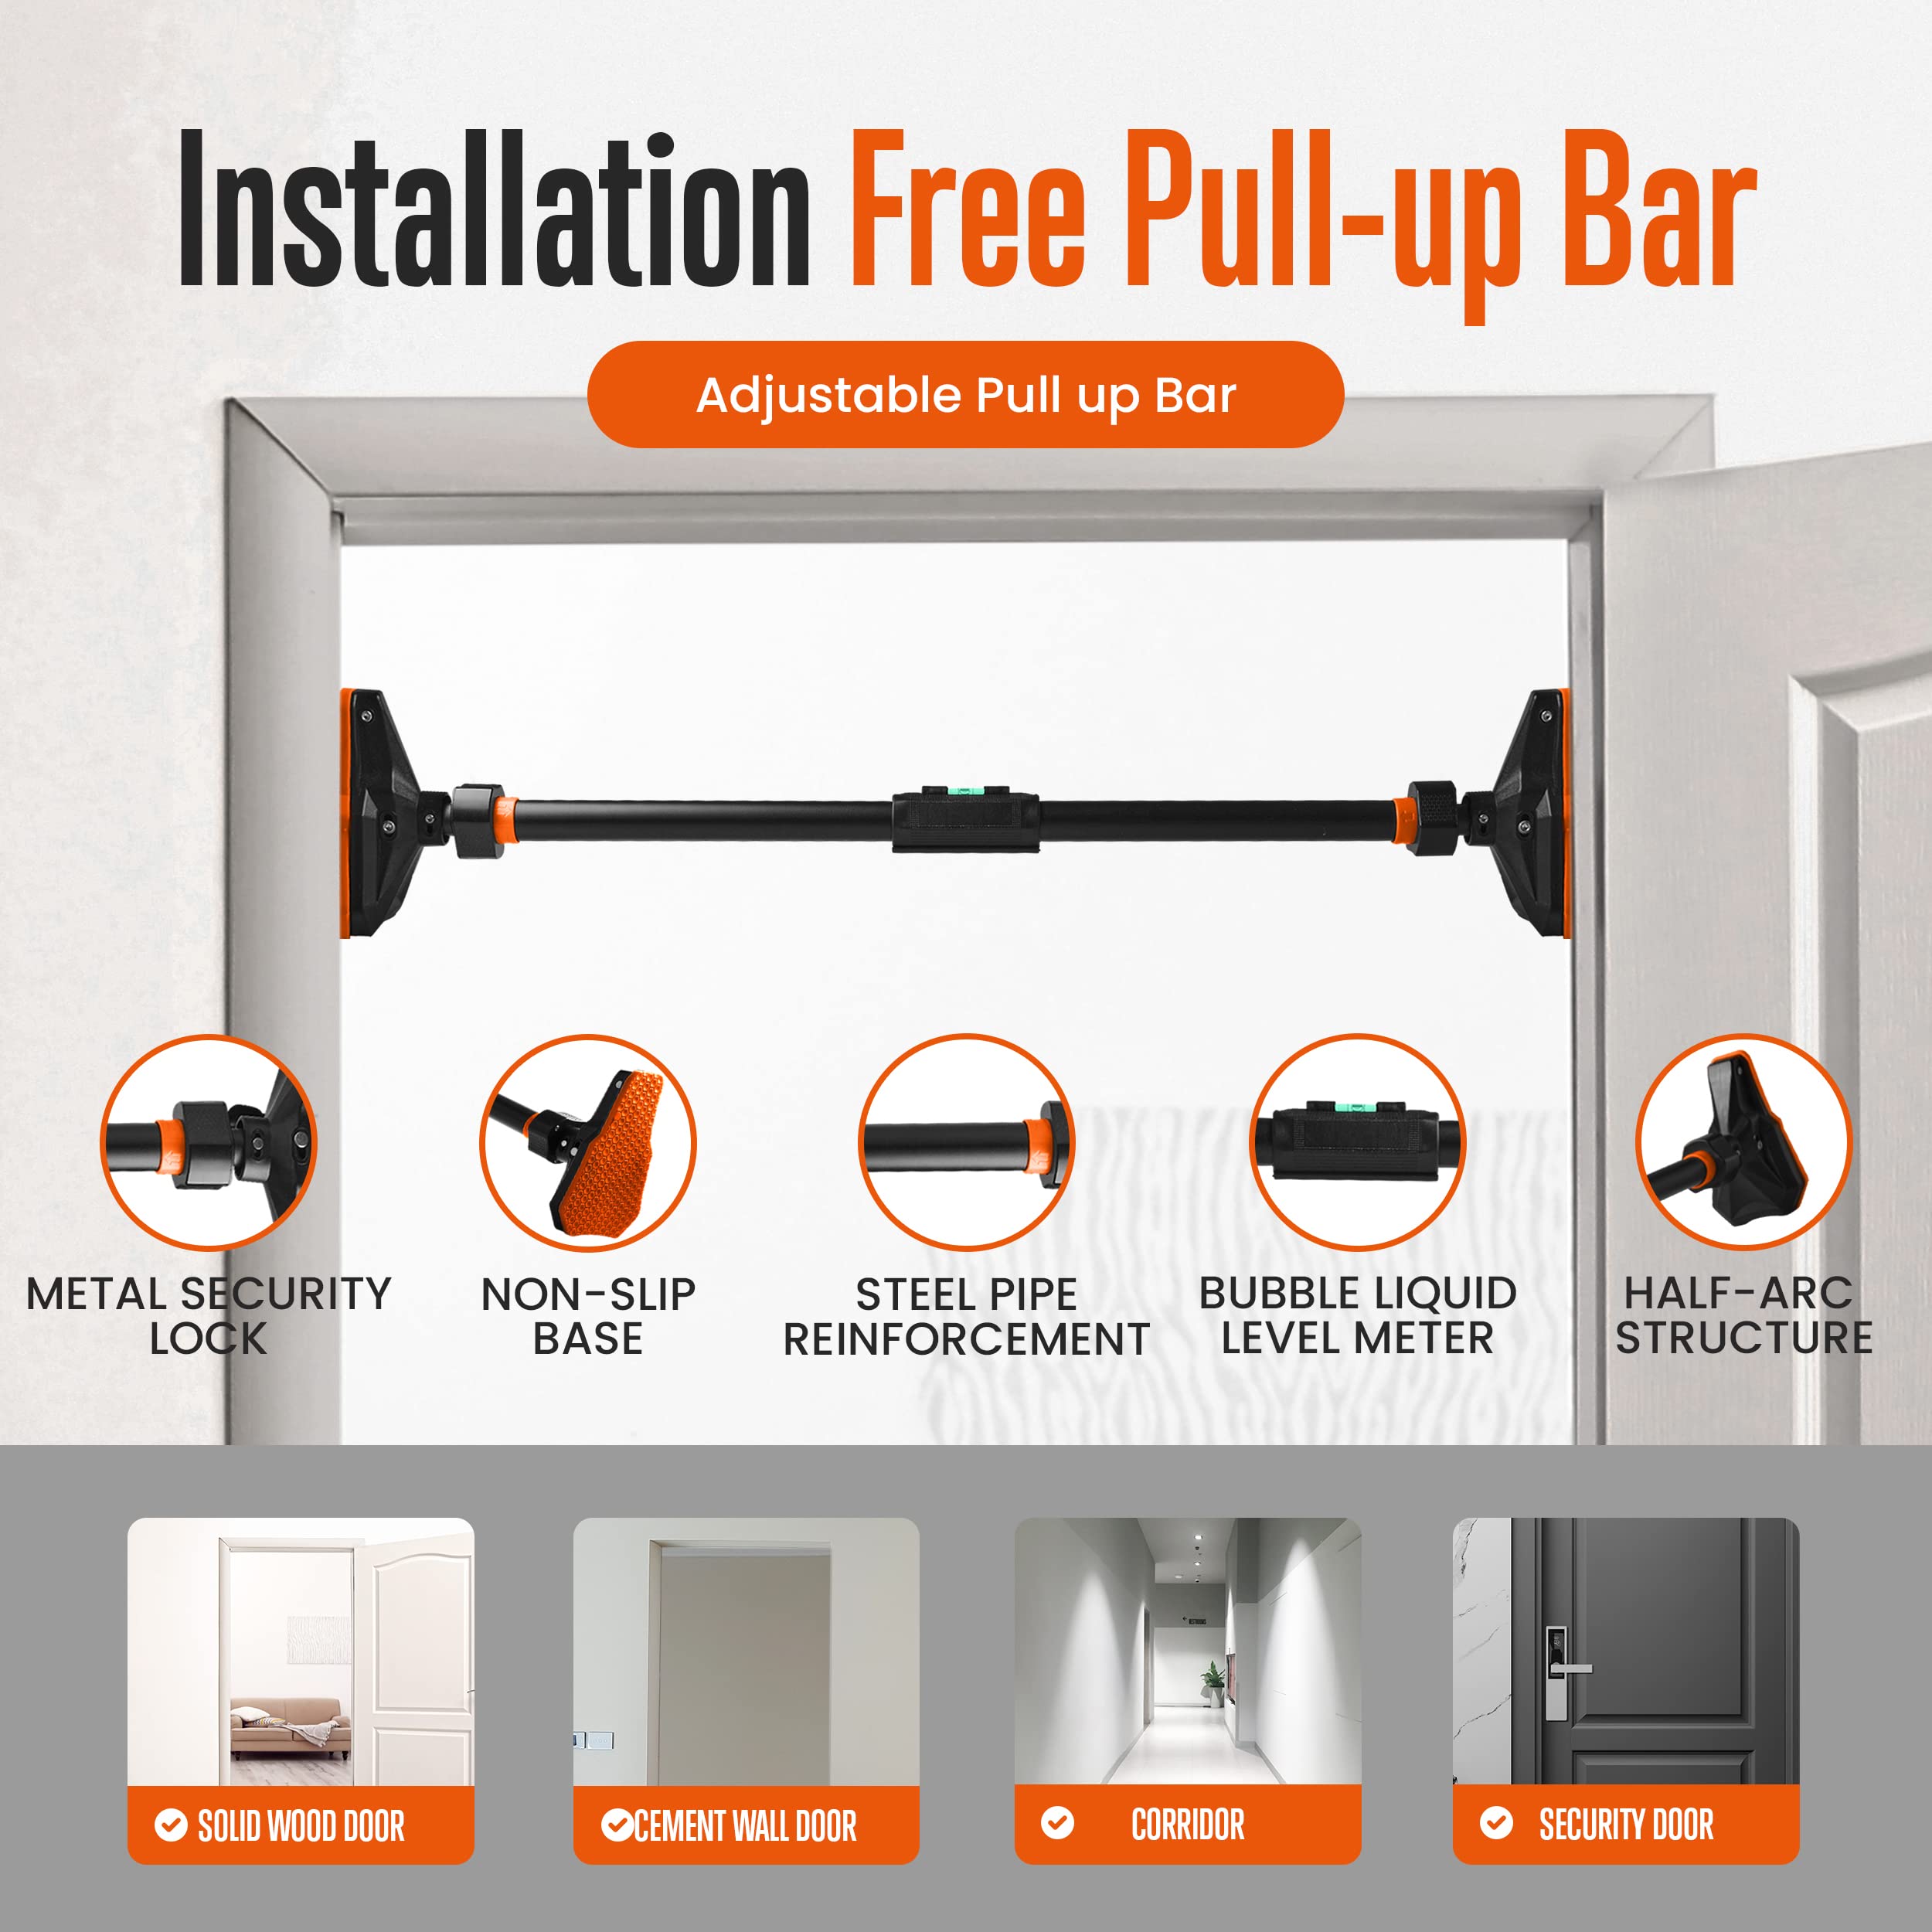 SQUATZ Adjustable Pull-Up & Chin-Up Bar - Door Frame Pullup & Doorway No-Screw, No-Damage Hanging Bar for Home Strength Training Exercise Equipment for Men and Women